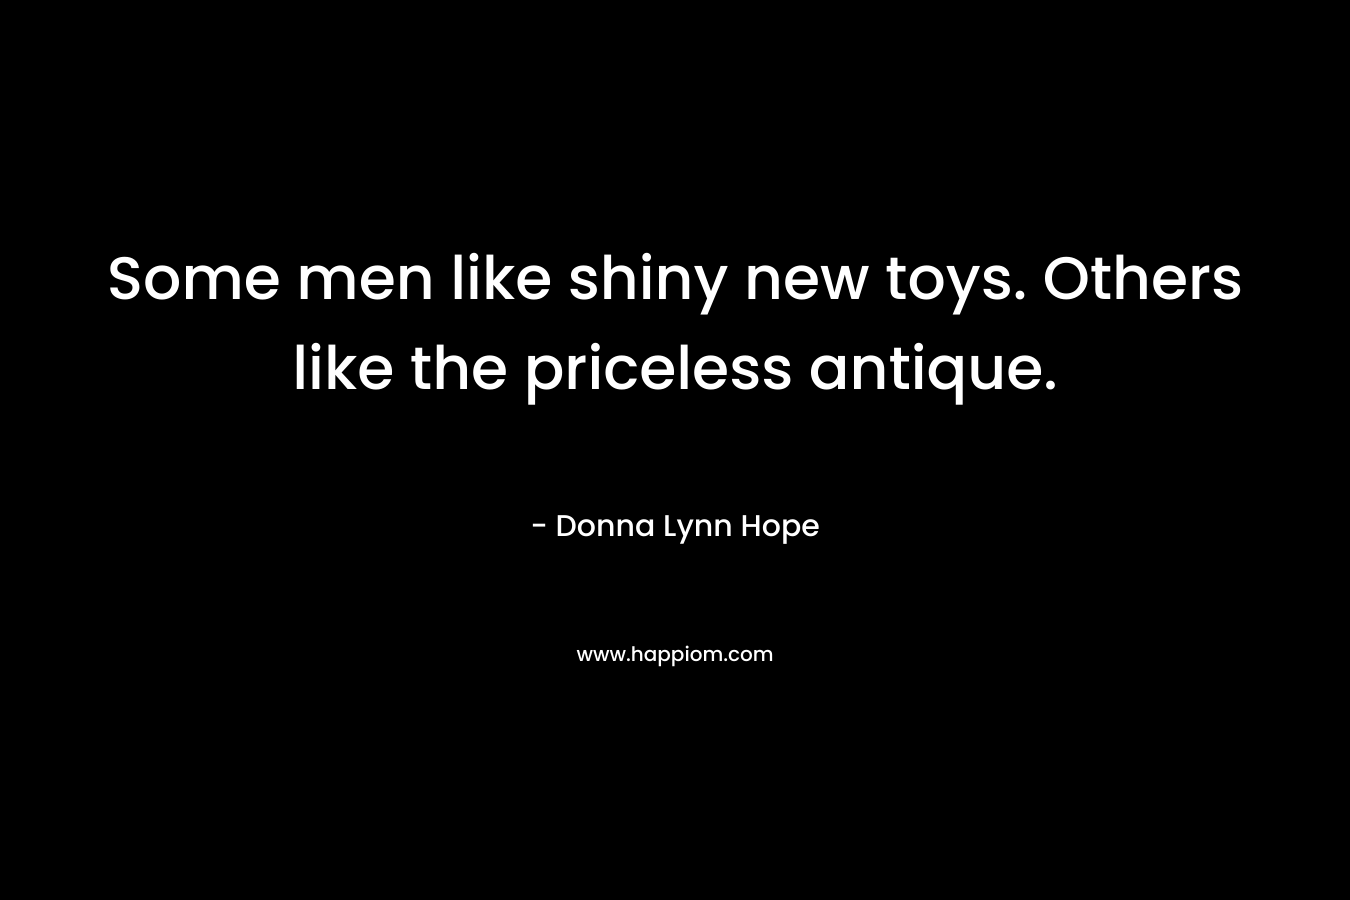 Some men like shiny new toys. Others like the priceless antique. – Donna Lynn Hope